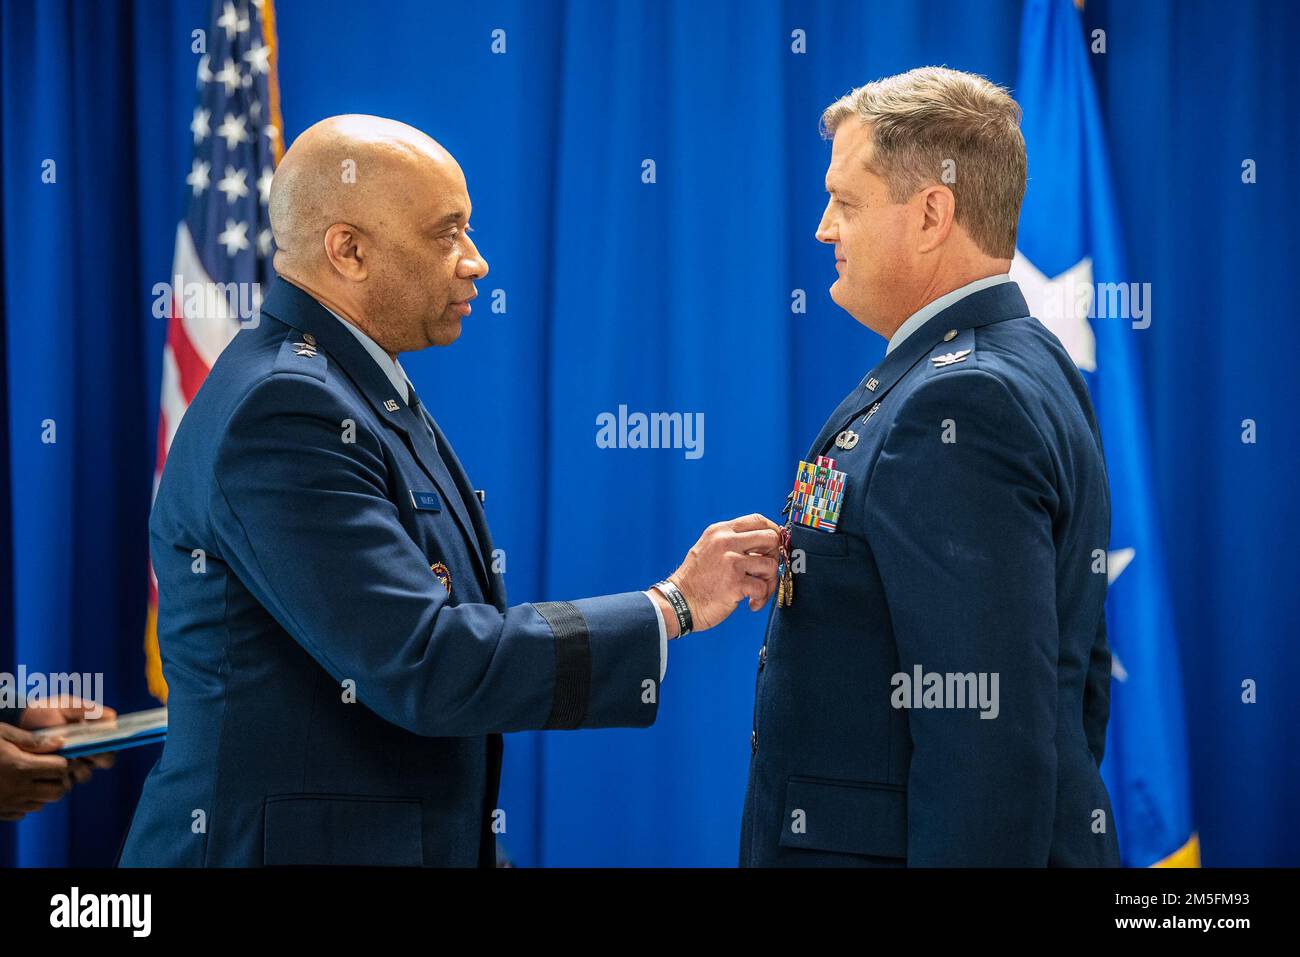 Major Gen. Charles Walker, left, director of the Office of Complex Investigations at the National Guard Bureau, pins a Kentucky Distinguished Service Medal to Col. Fred Ehrman’s uniform during Ehrman’s retirement ceremony at the Kentucky Air National Guard Base in Louisville, Ky., March 13, 2022. Ehrman, assistant to the command chaplain at United States Air Forces Europe and Air Forces Africa, served as a chaplain at the Kentucky Air National Guard’s 123rd Airlift Wing for 16 years. Stock Photo